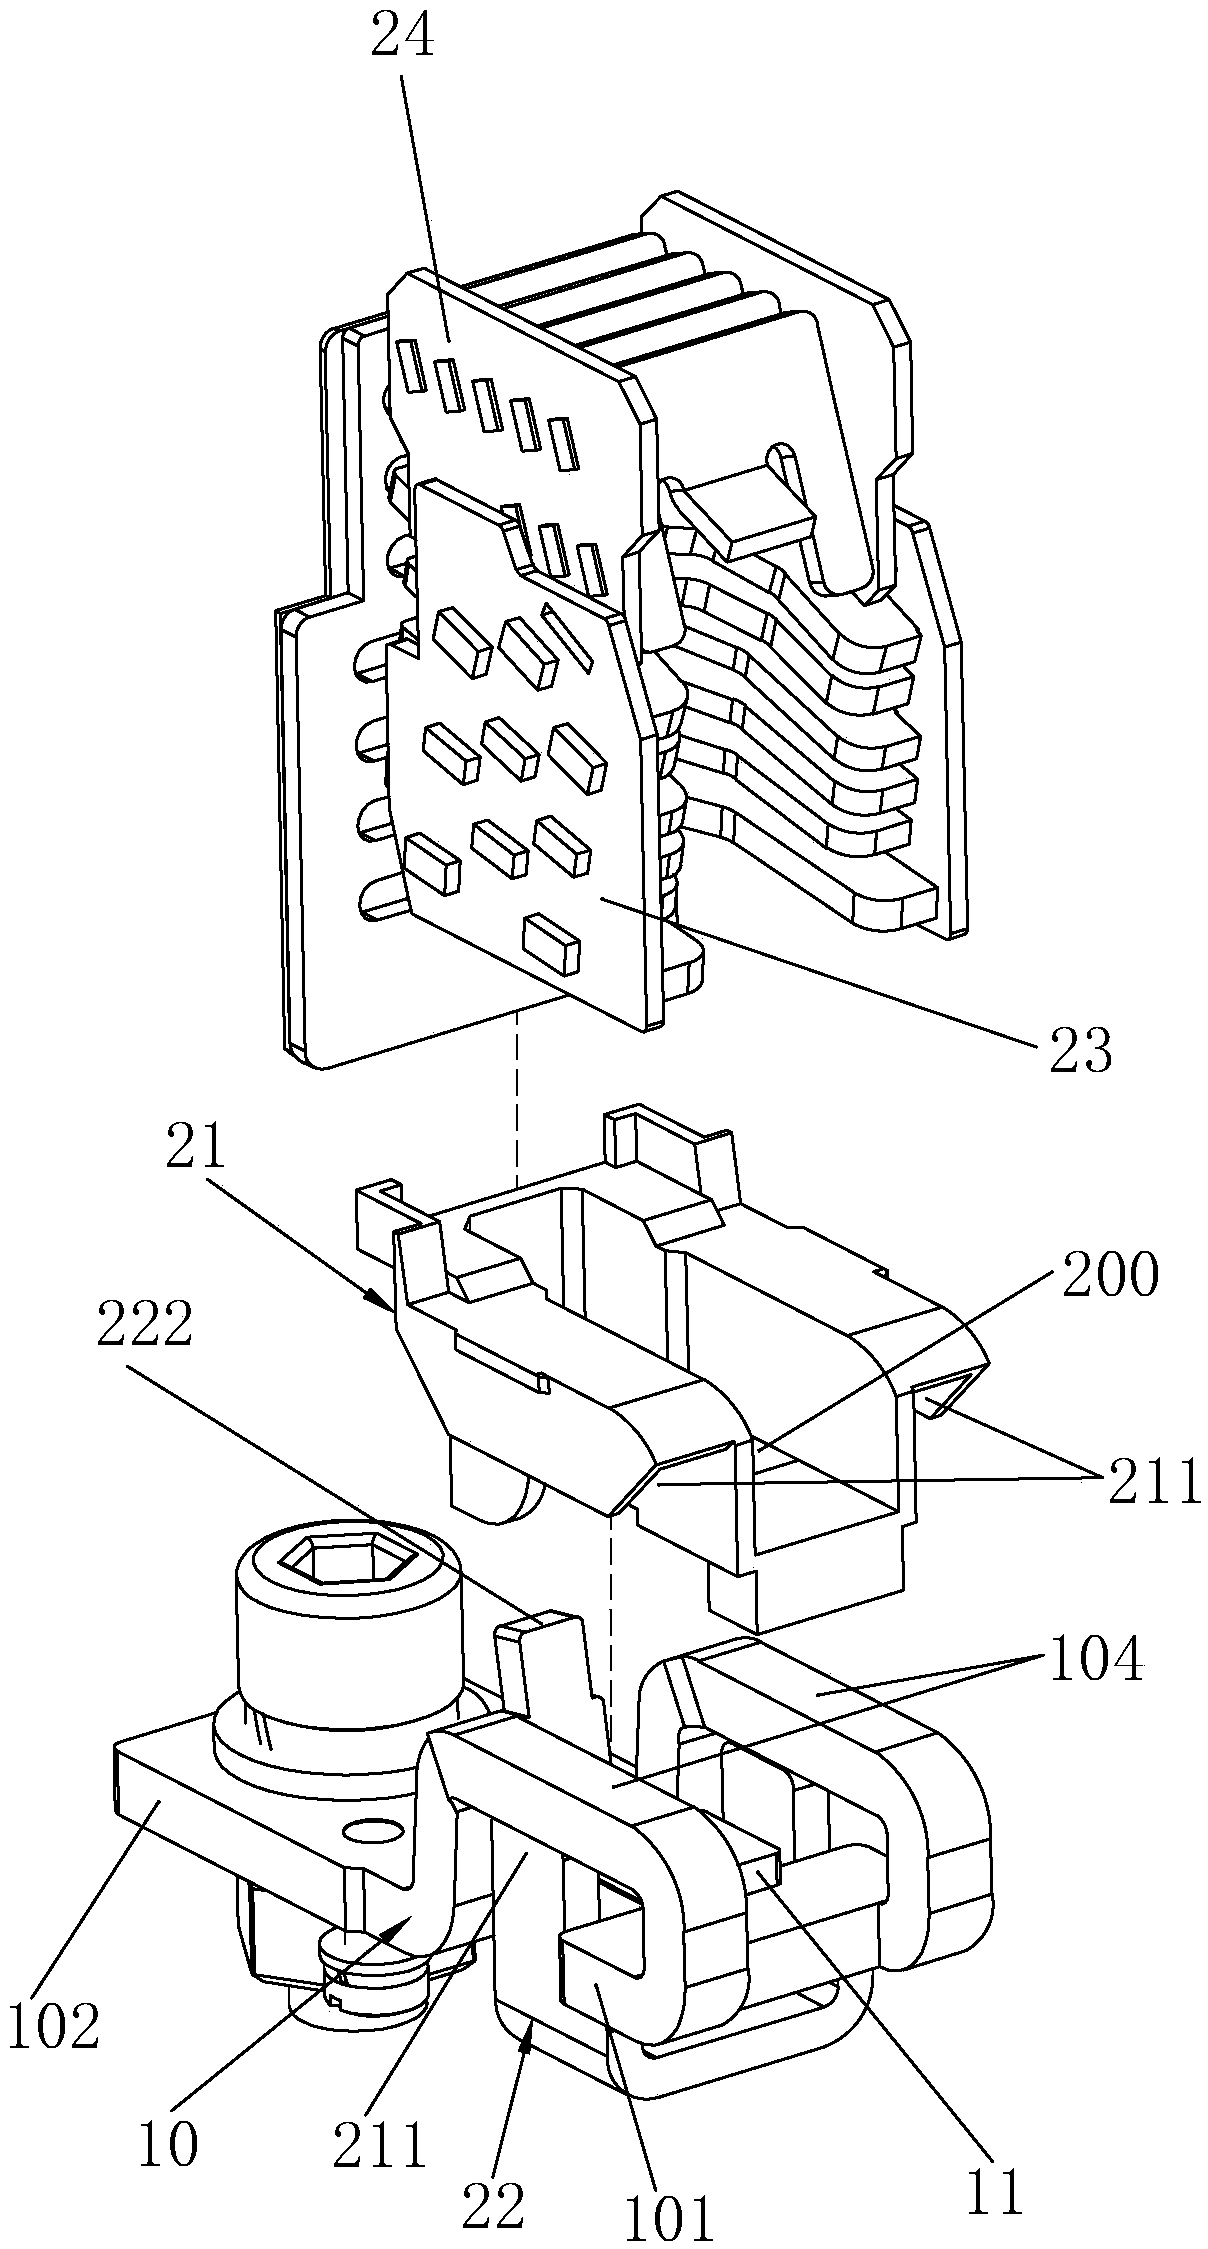 Static contact arc extinguishing module with double arc extinguishing chambers for circuit breaker